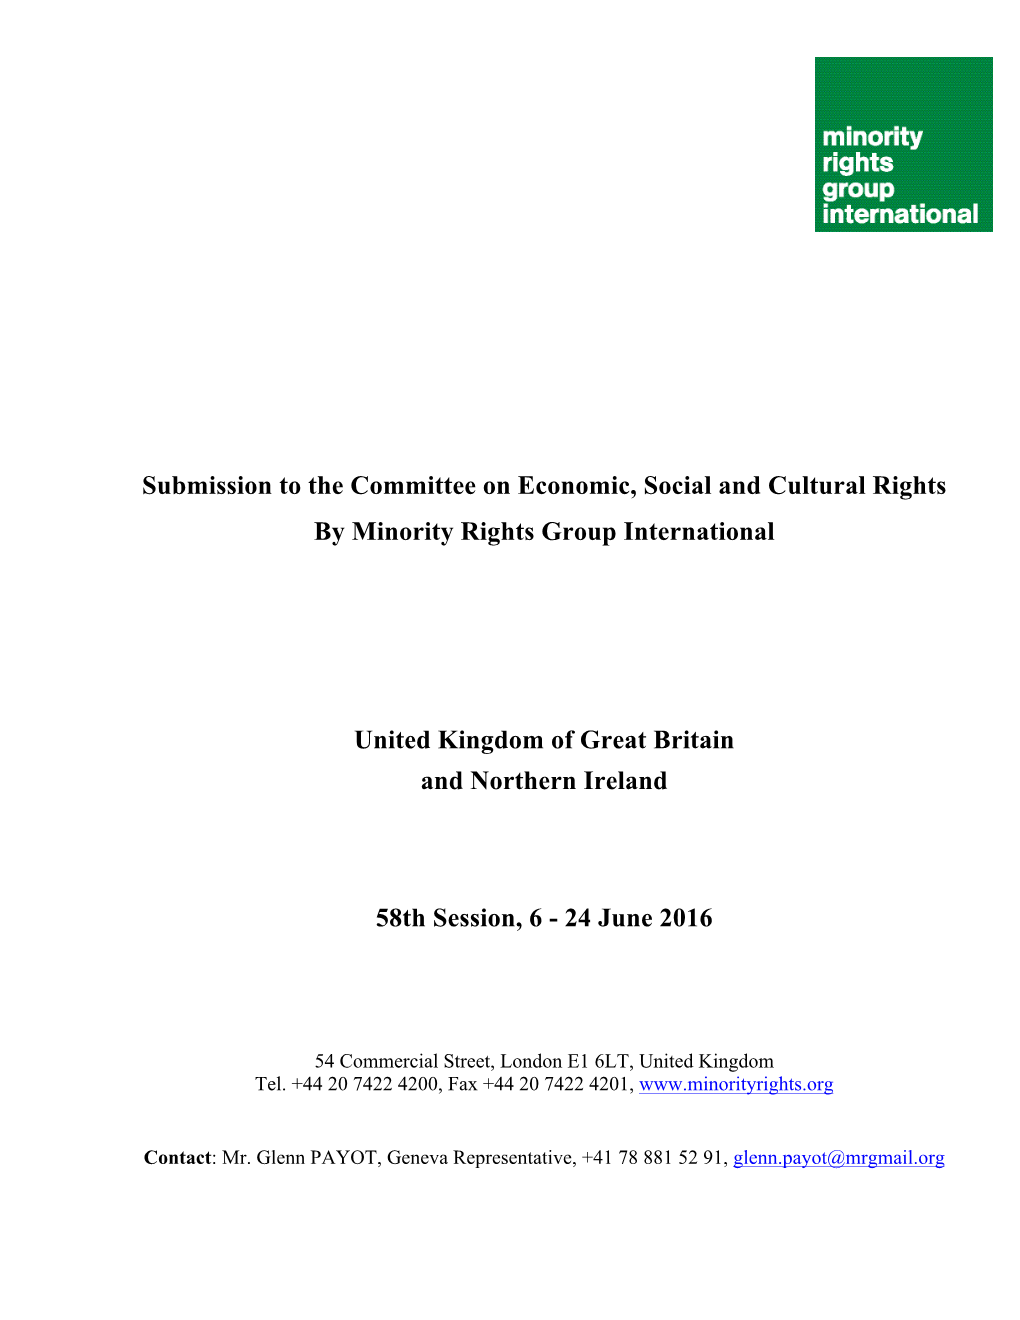 Submission to the Committee on Economic, Social and Cultural Rights by Minority Rights Group International United Kingdom Of